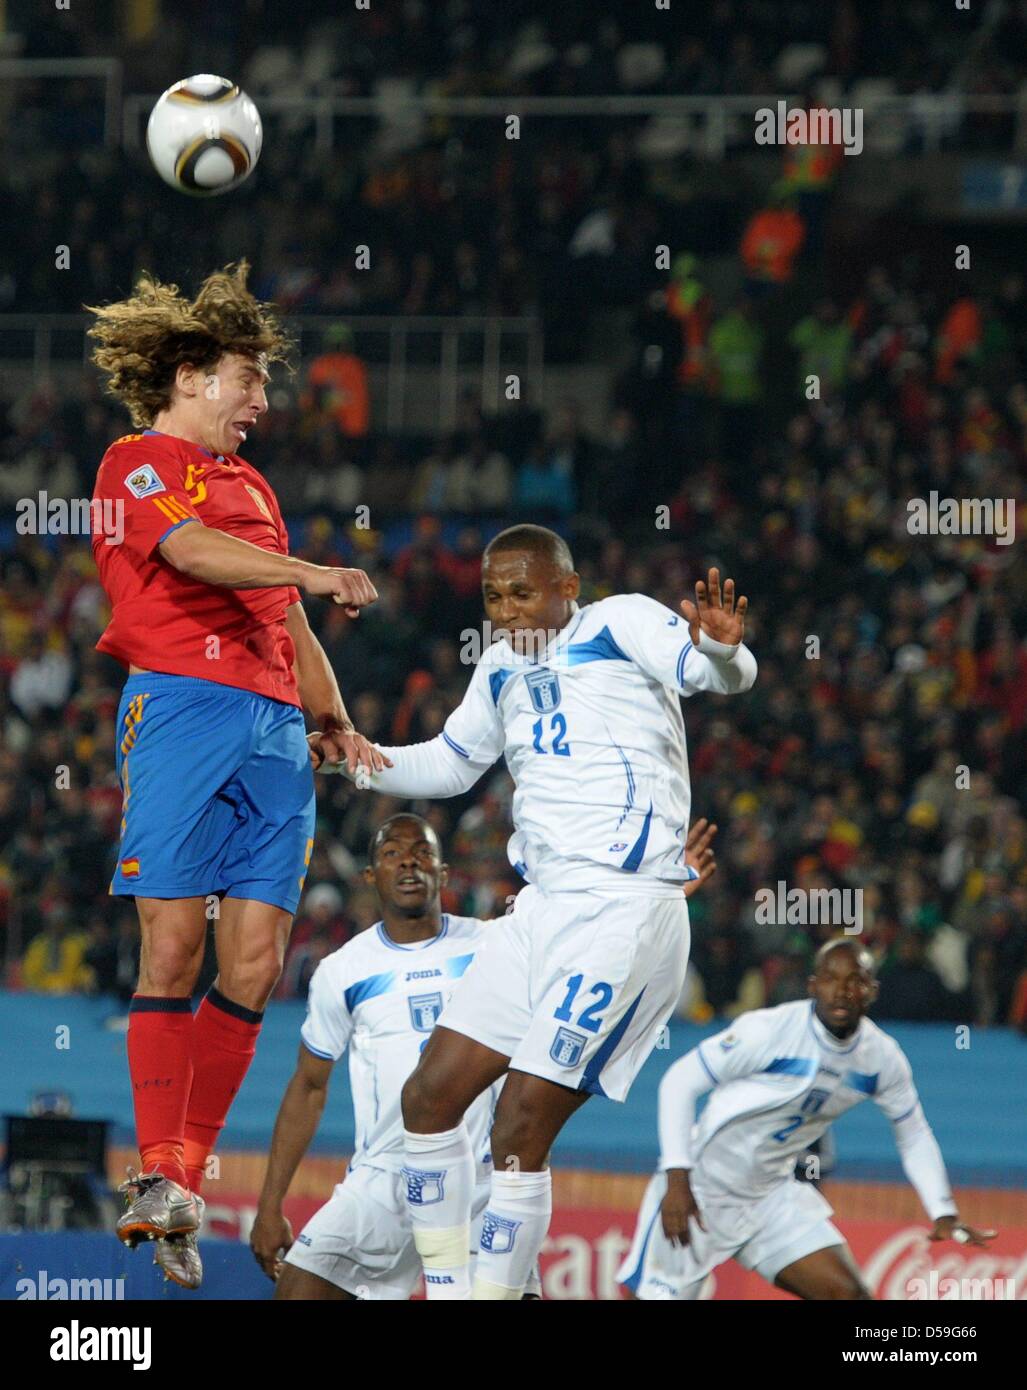 Carles Puyol (L) of Spain vies with Georgie Welcome (C) of Honduras during the FIFA World Cup 2010 group H match between Spain and Honduras at the Ellis Park Stadium in Johannesburg, South Africa 21 June 2010. Photo: Ronald Wittek dpa - Please refer to http://dpaq.de/FIFA-WM2010-TC Stock Photo